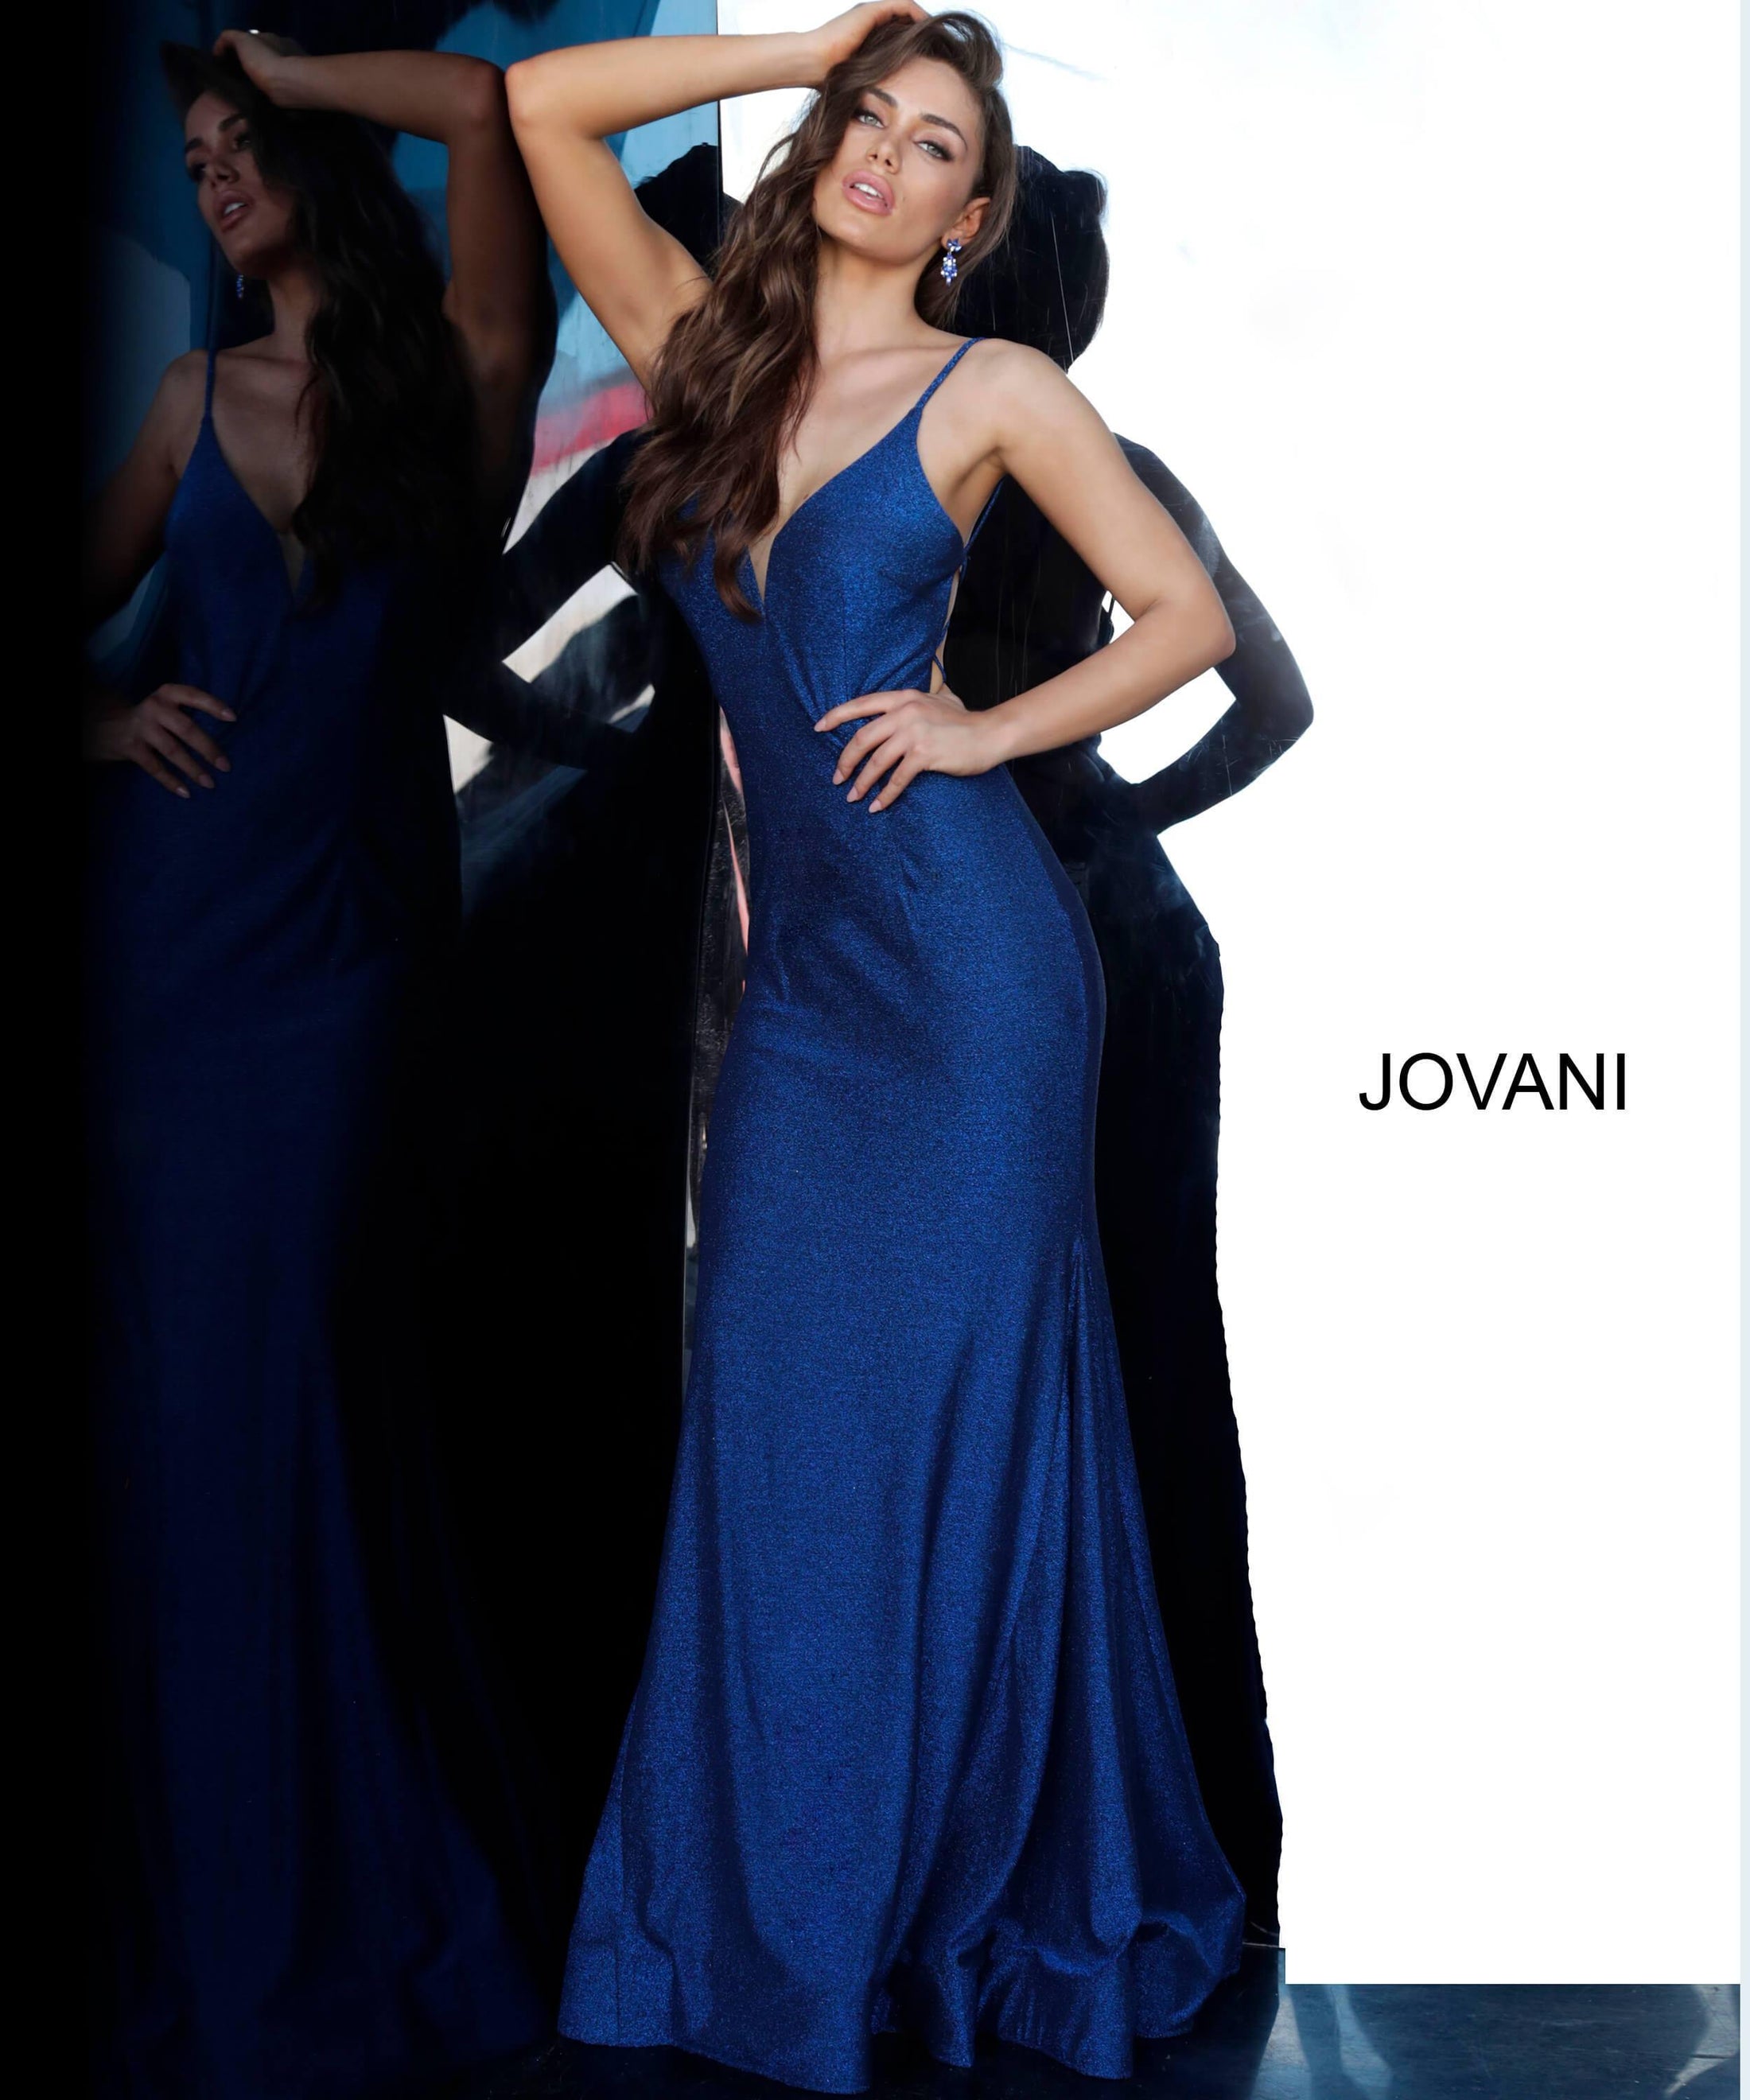 Jovani 4221 Long Formal Glitter Prom Gown for $480.0 – The Dress Outlet